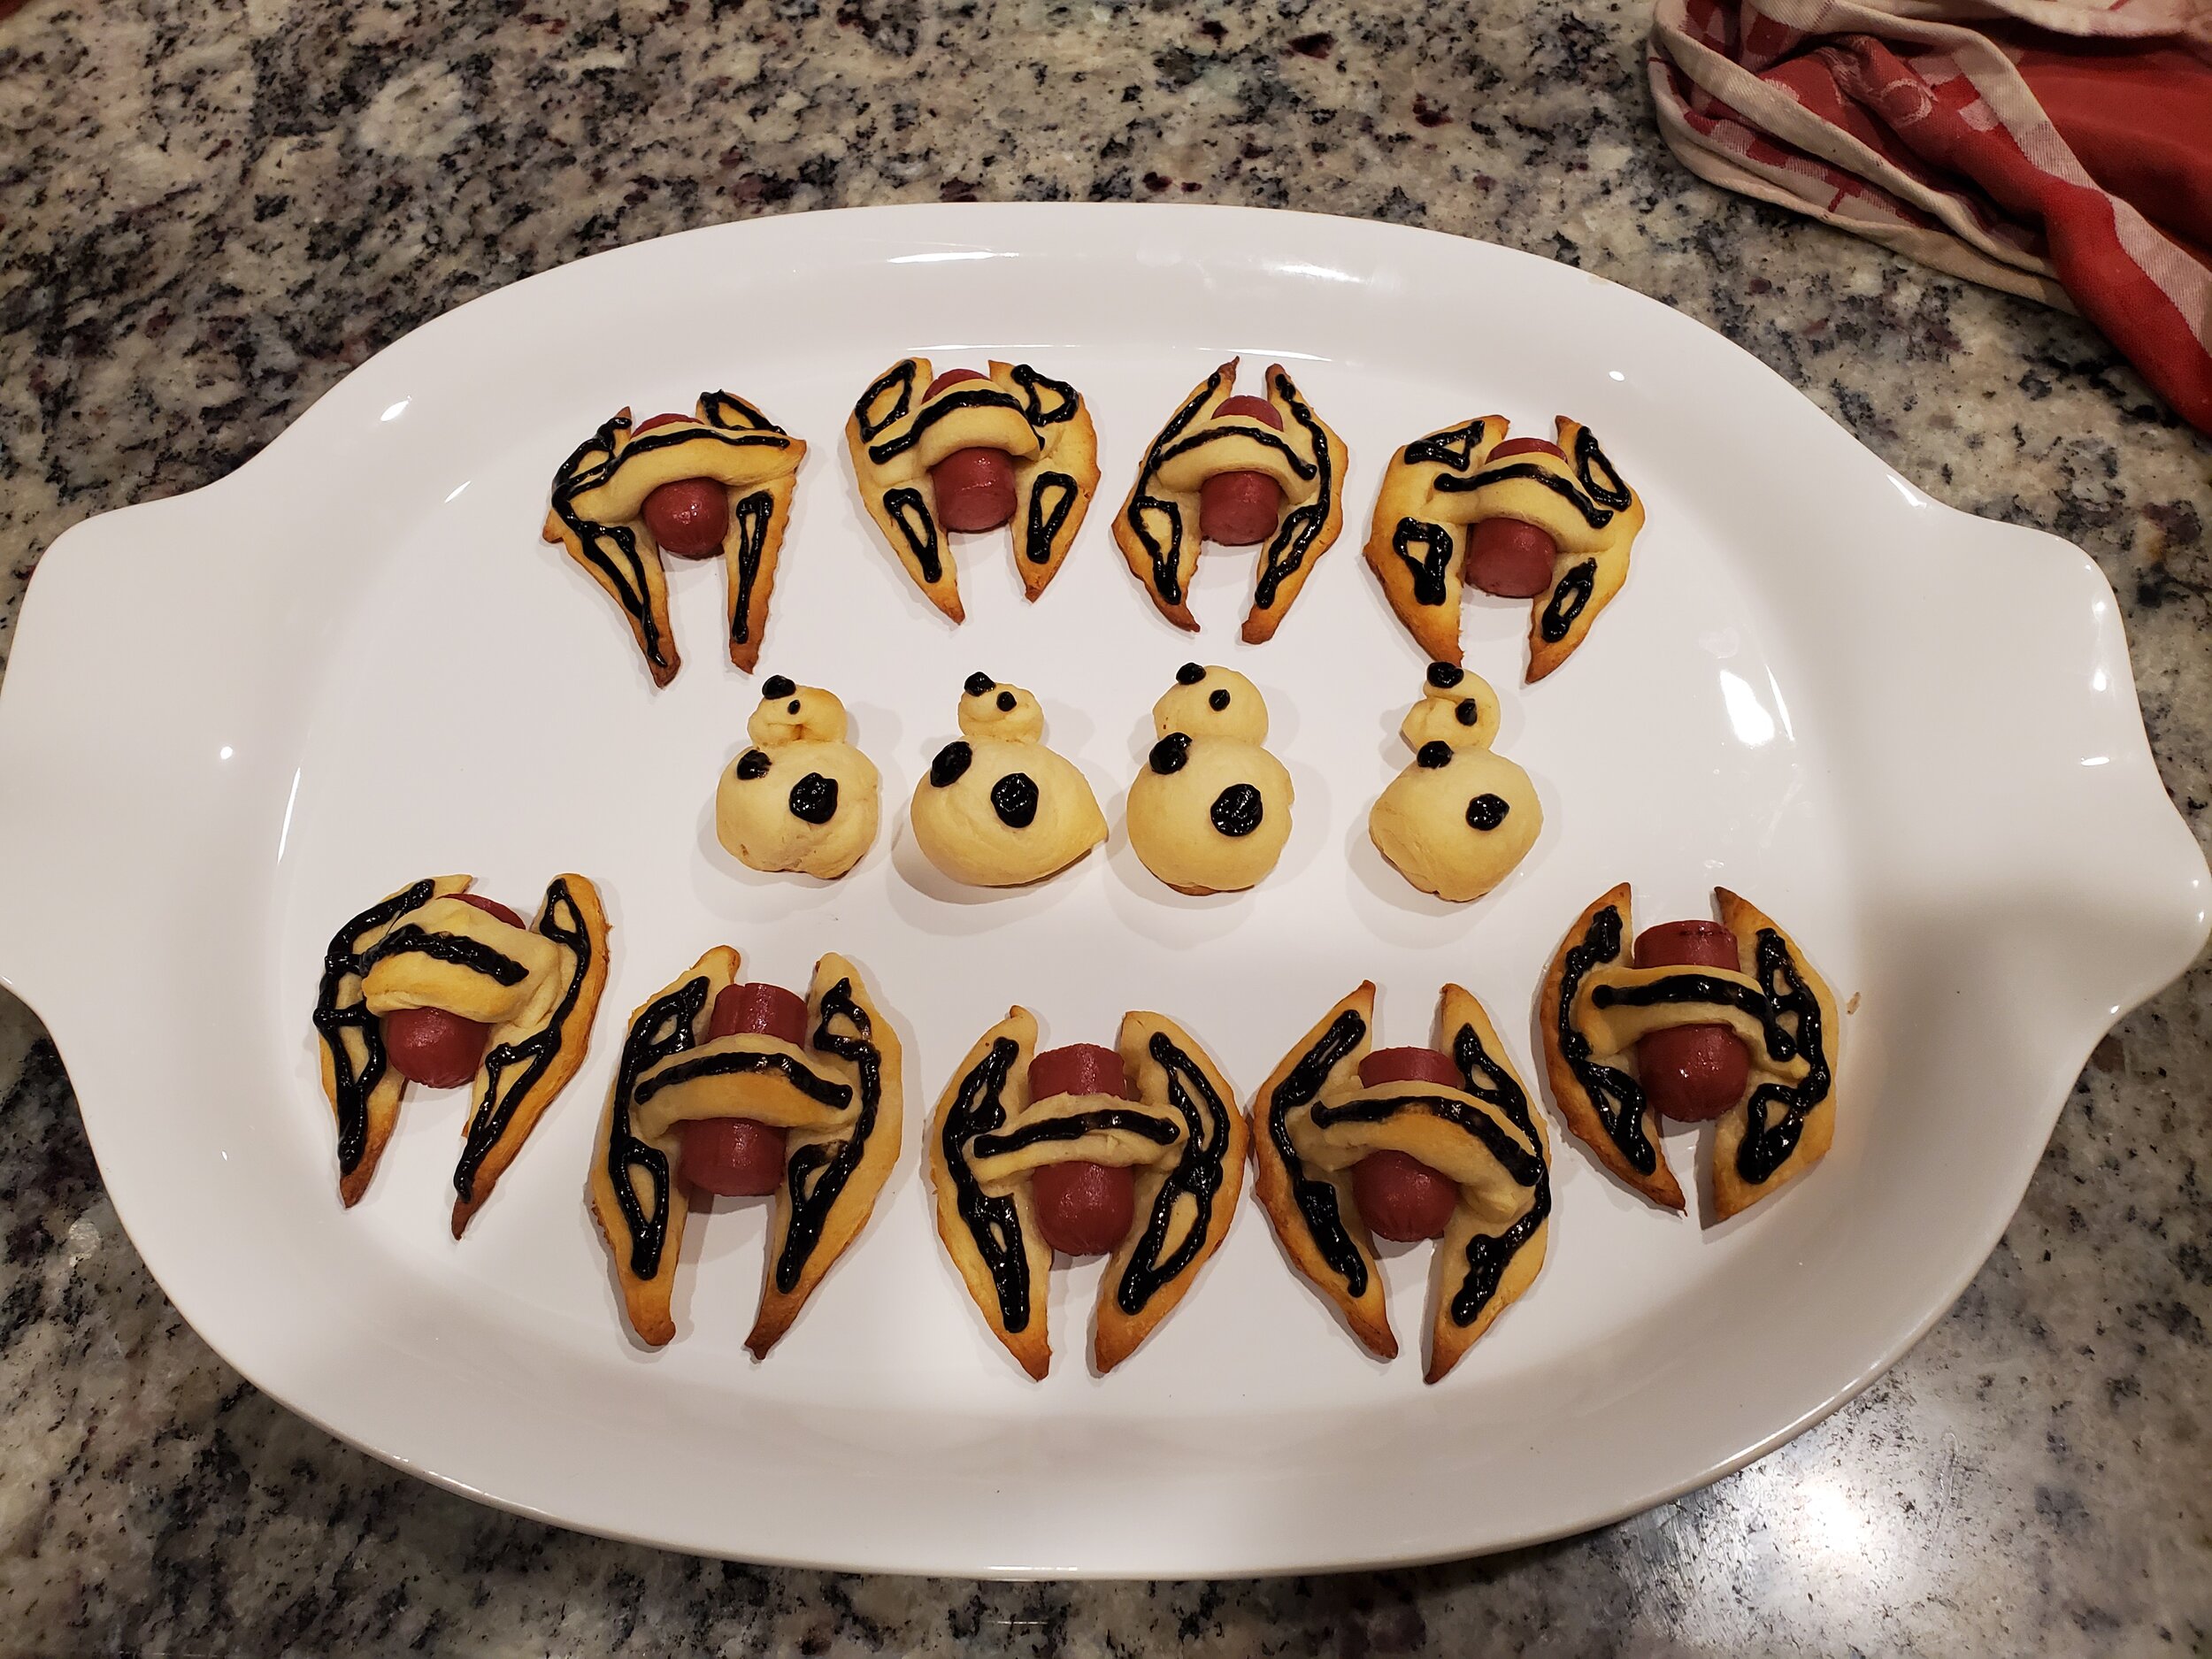 TIE fighter and BB8 pigs in a blanket